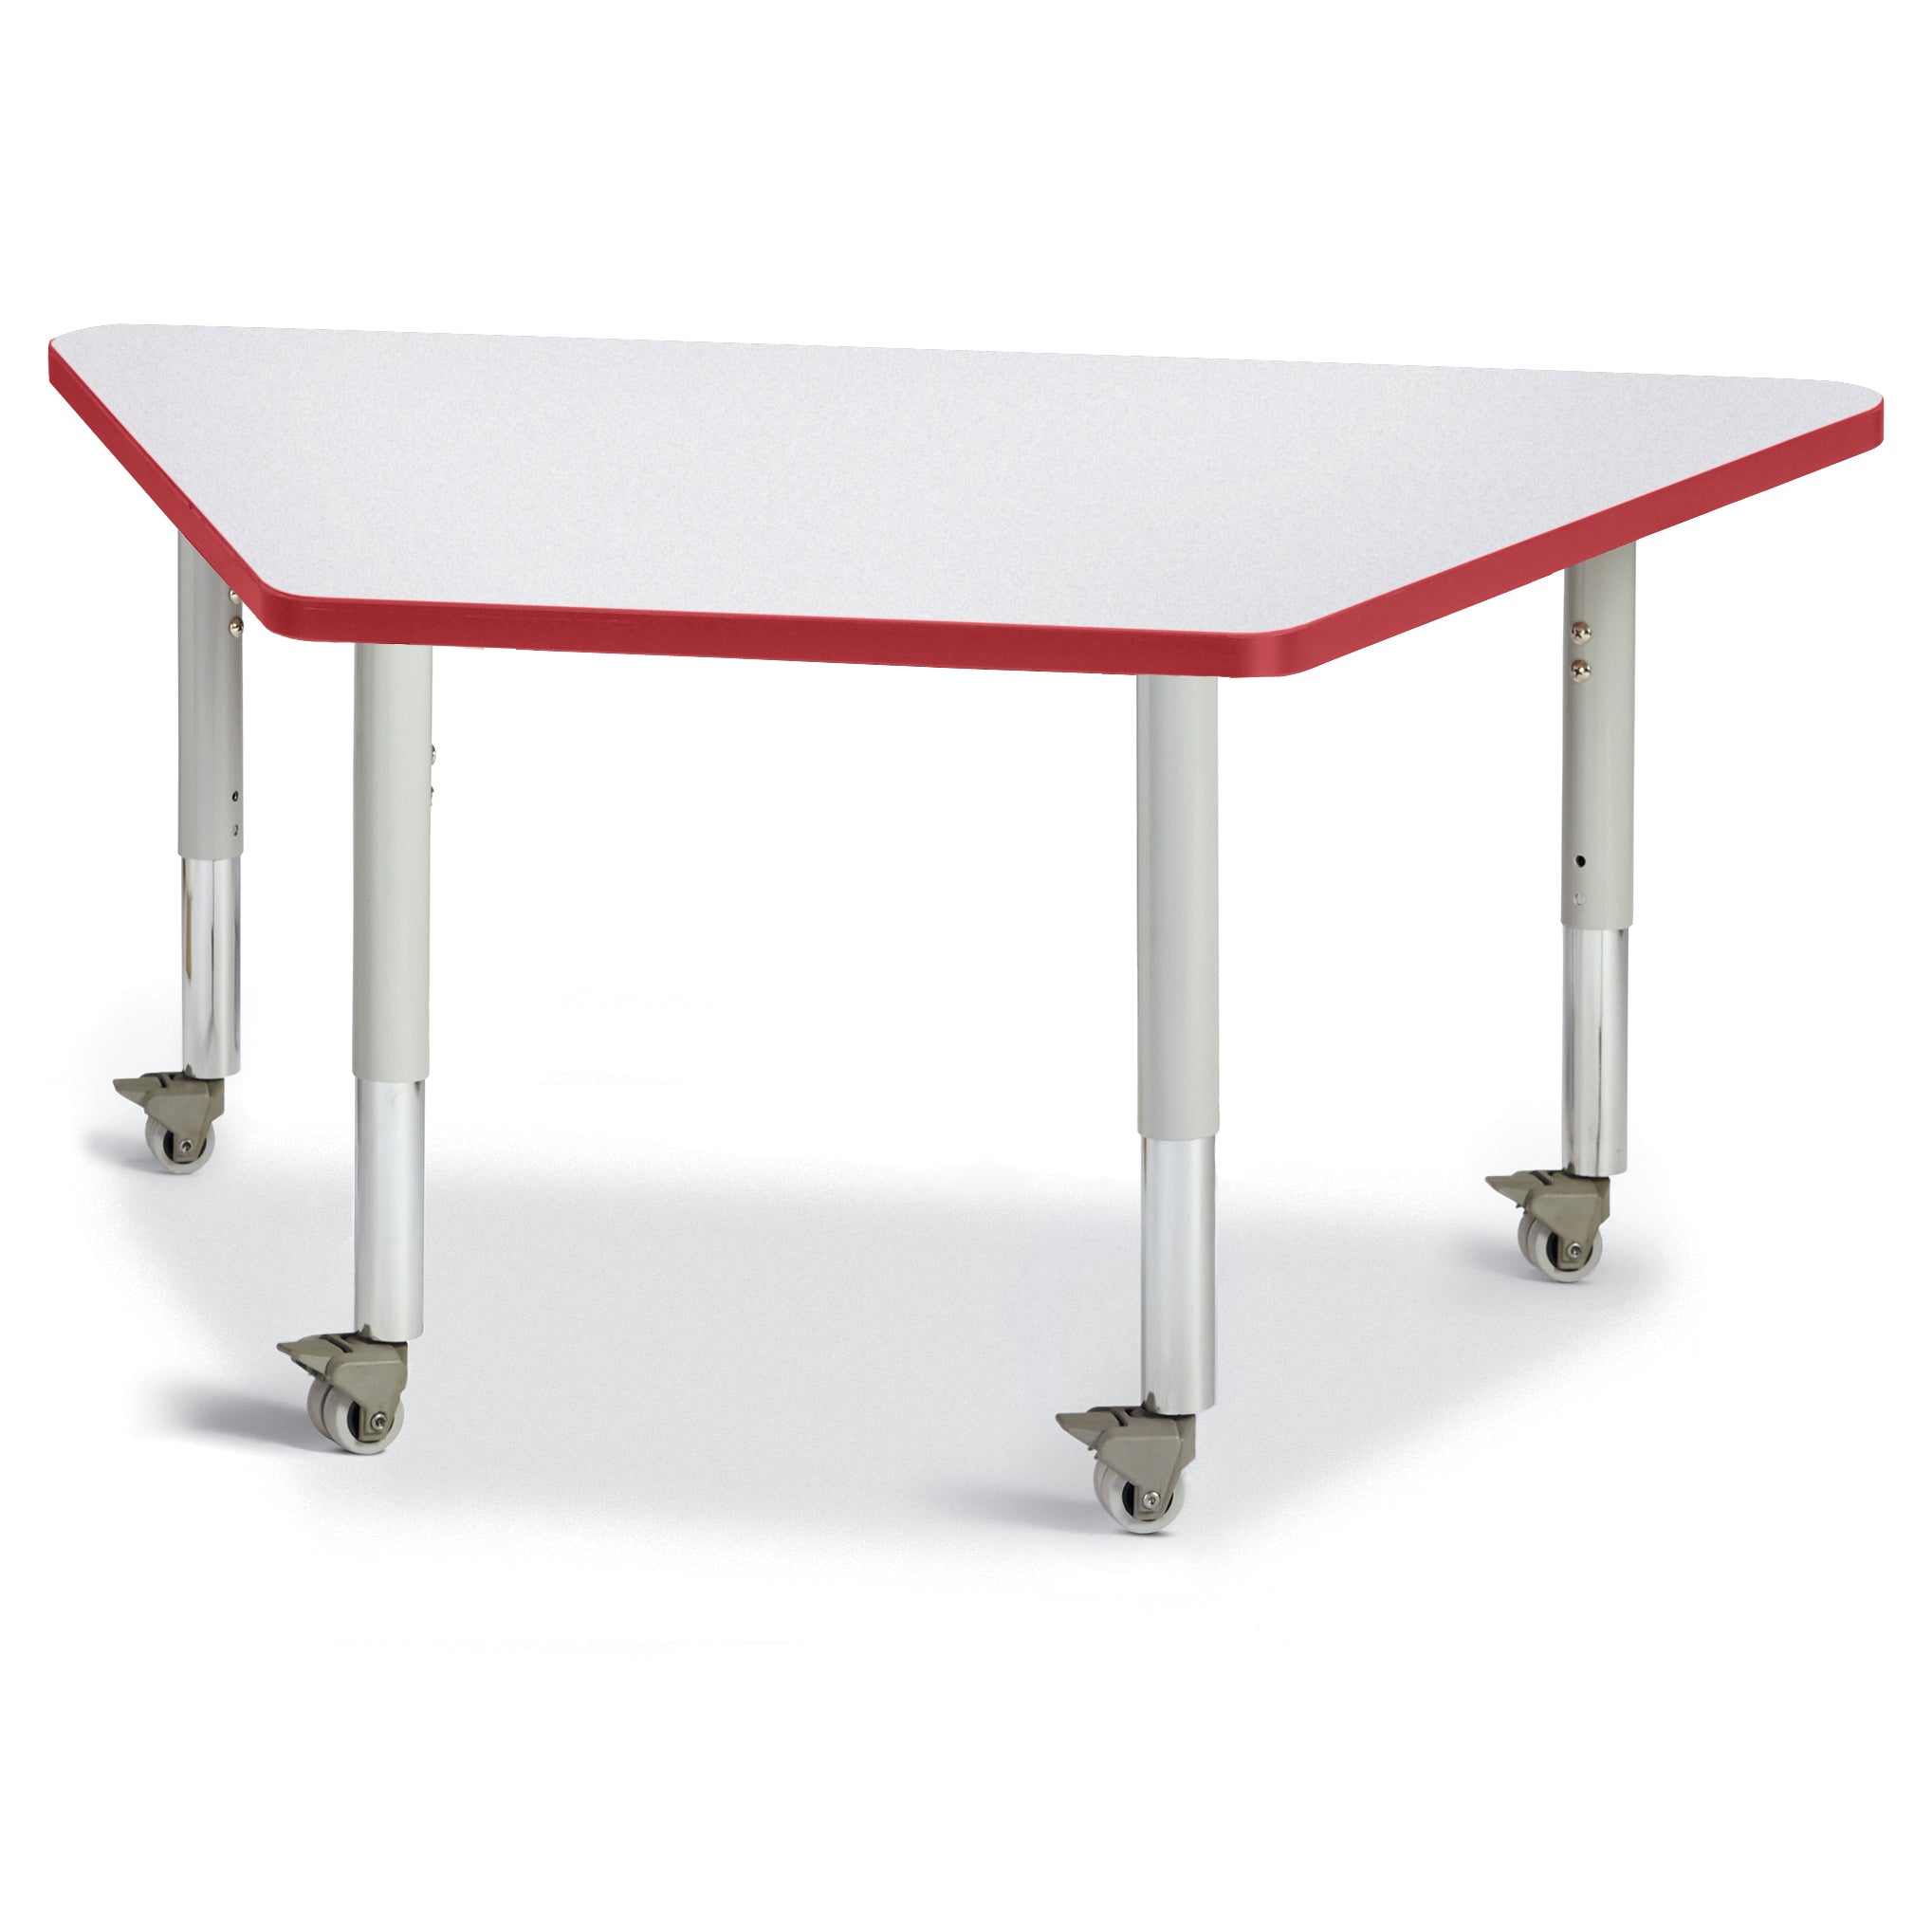 6438JCM008, Berries Trapezoid Activity Tables - 24" X 48", Mobile - Freckled Gray/Red/Gray